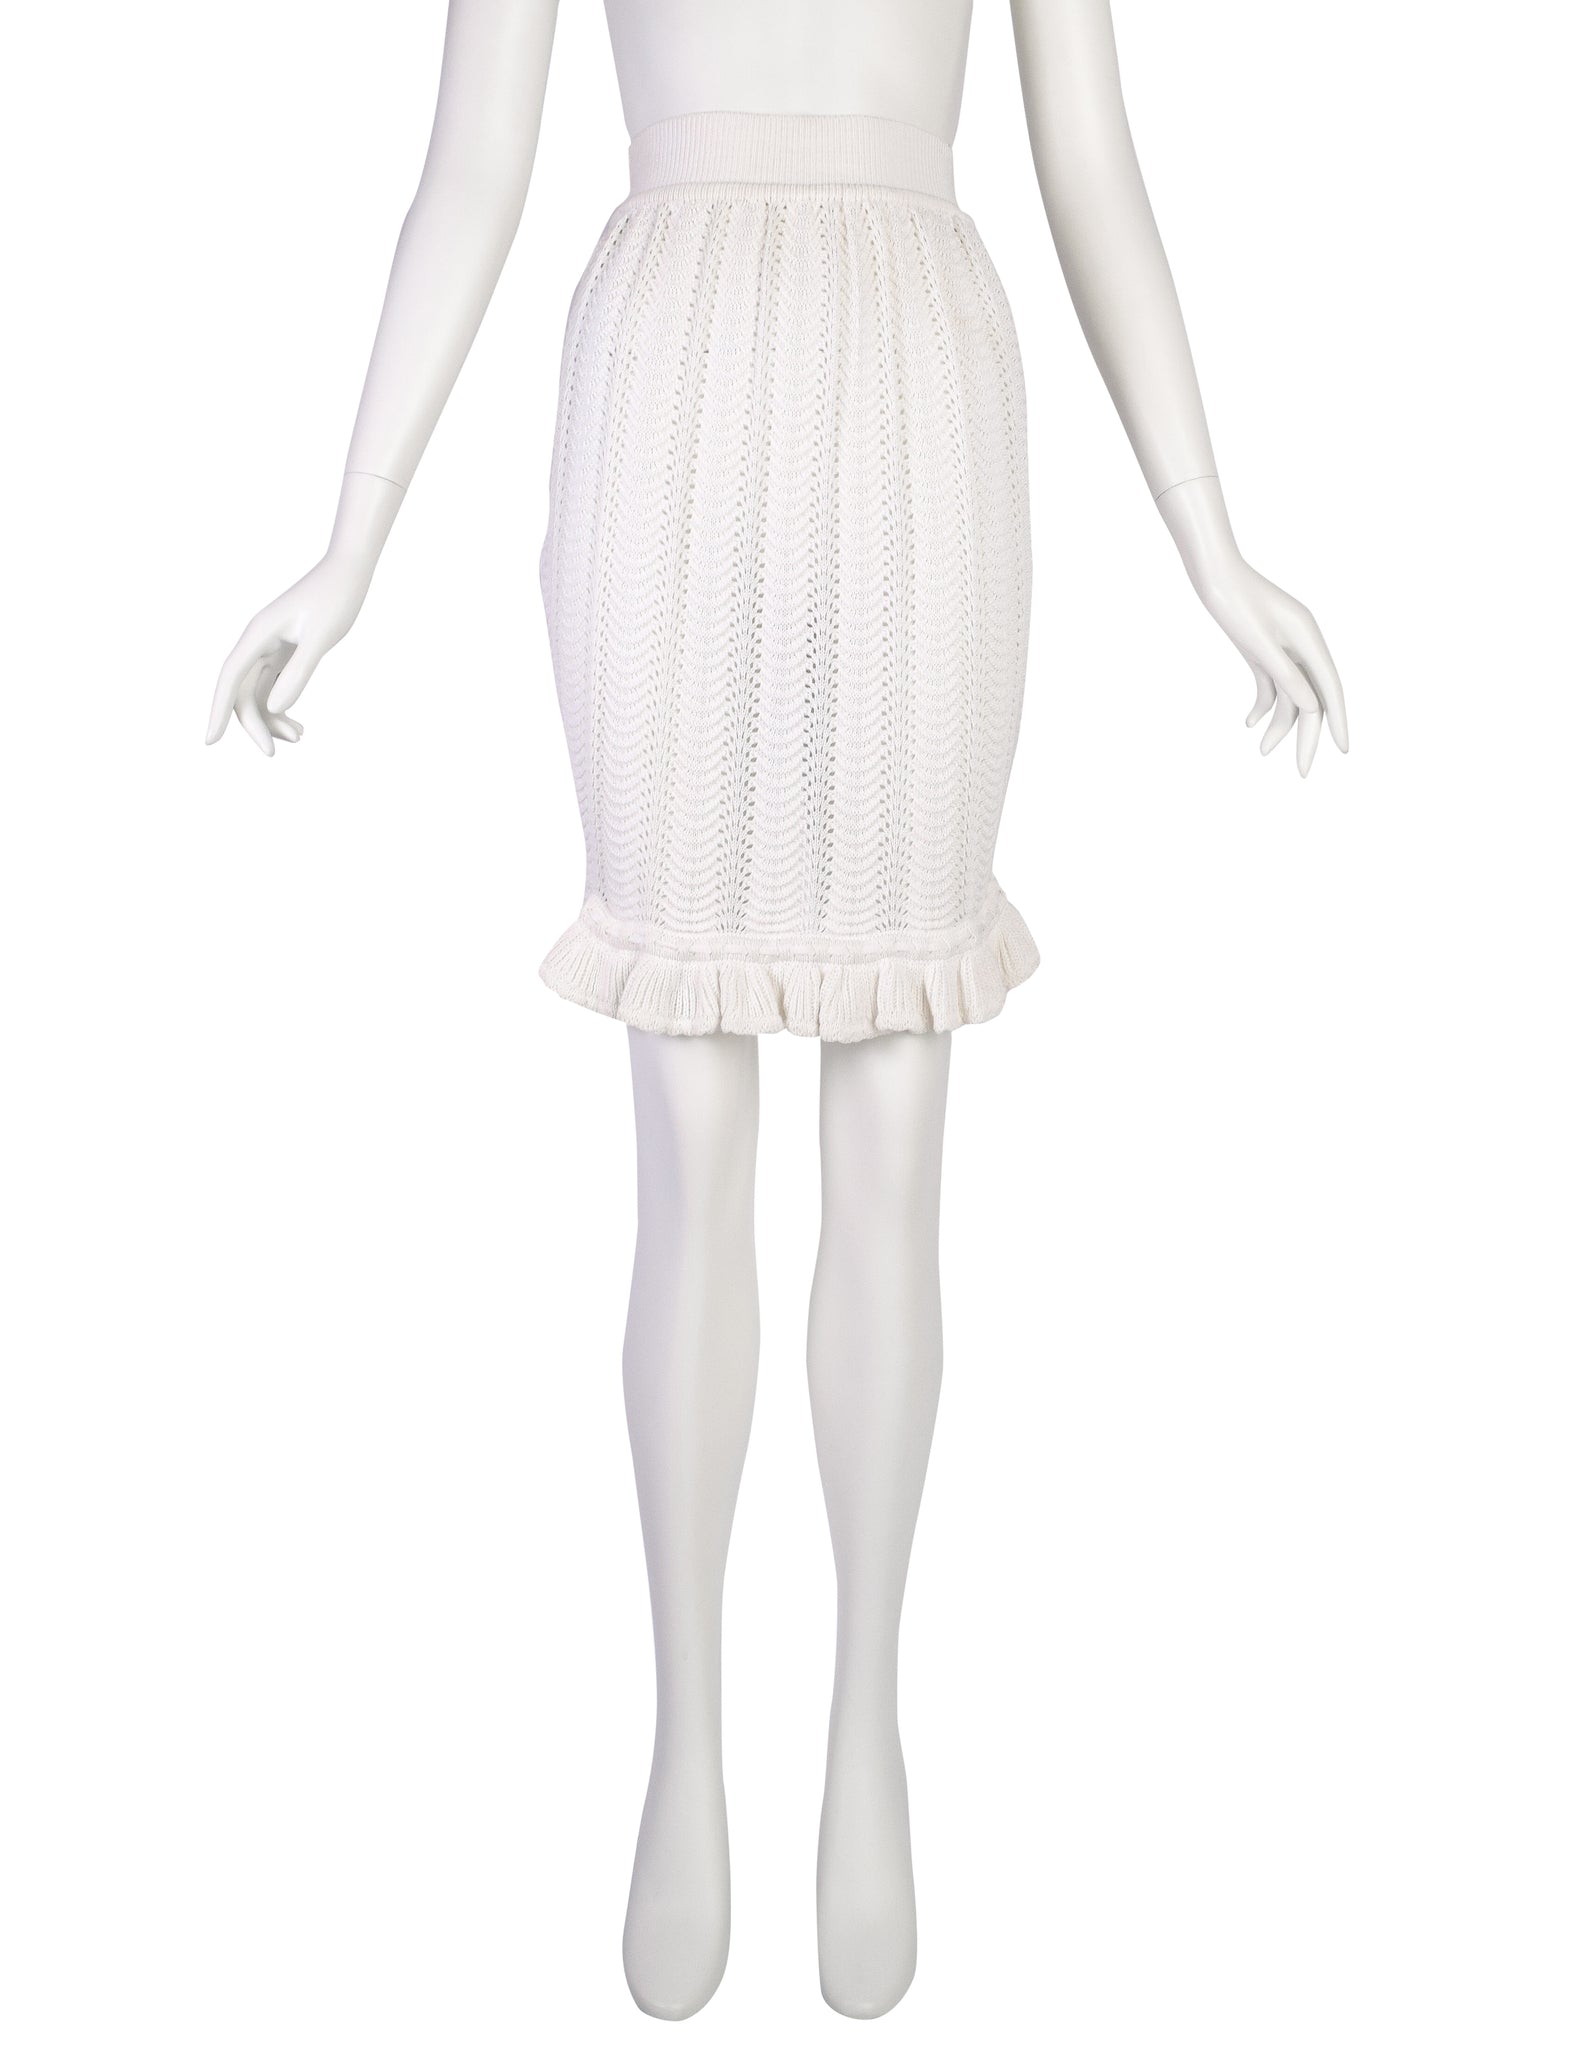 Vivienne Westwood Vintage SS 1995 'Erotic Zones' White Scalloped Knit Bustle Skirt